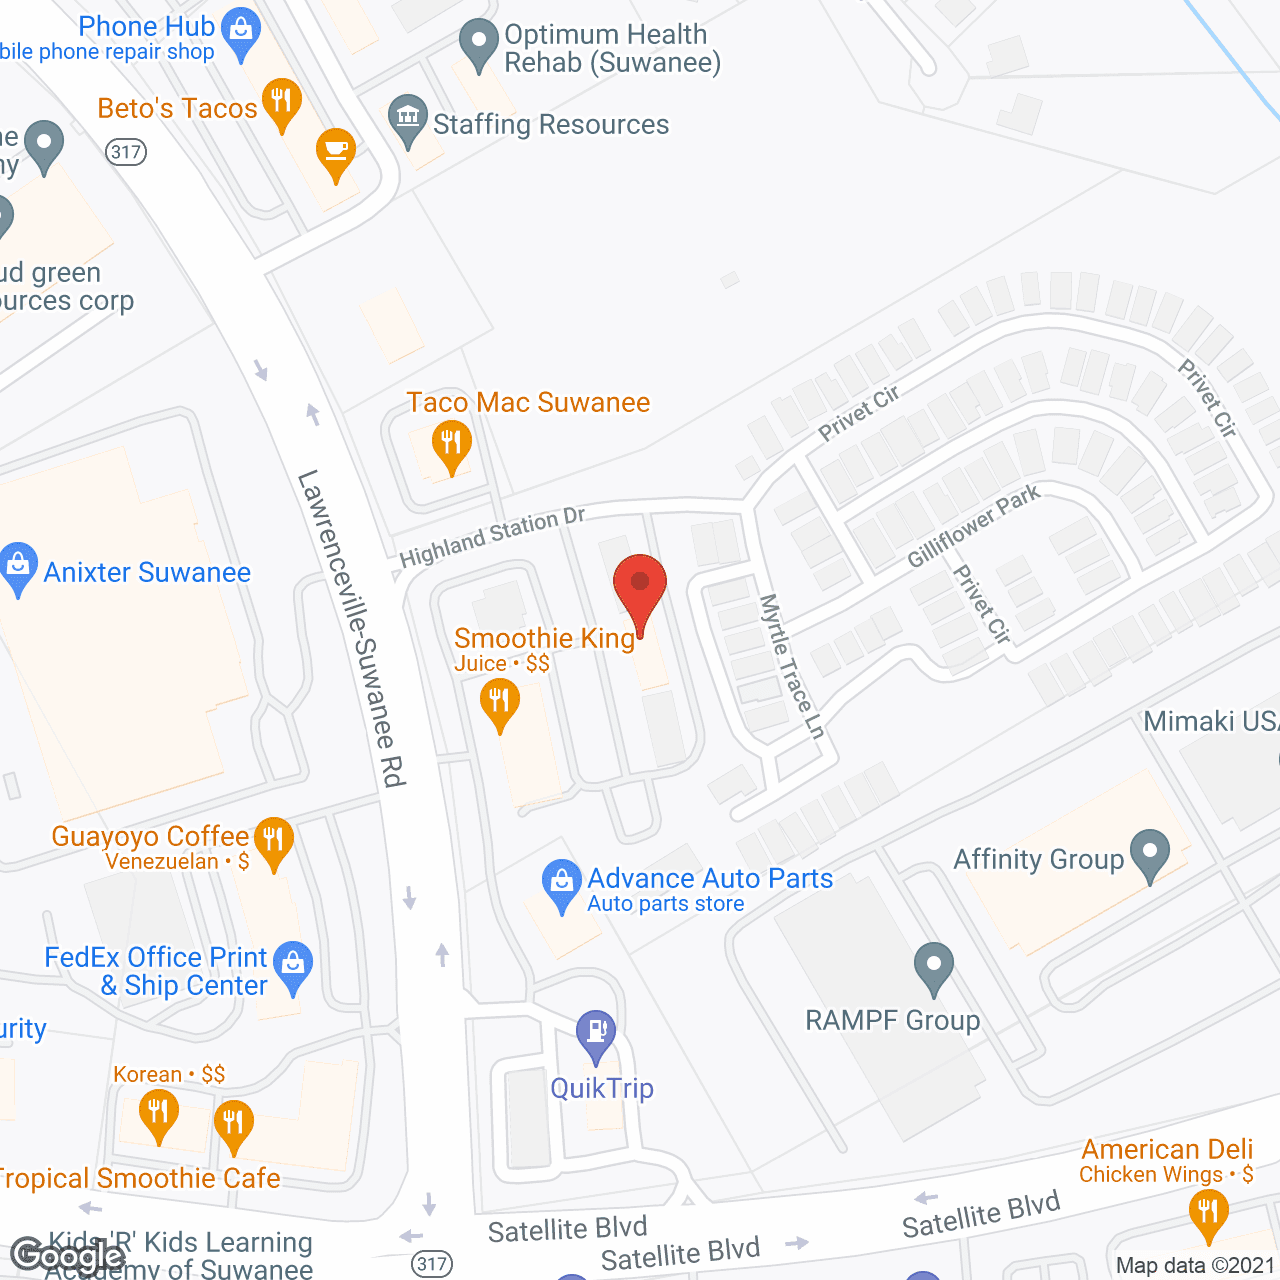 Direct Healthcare Services in google map